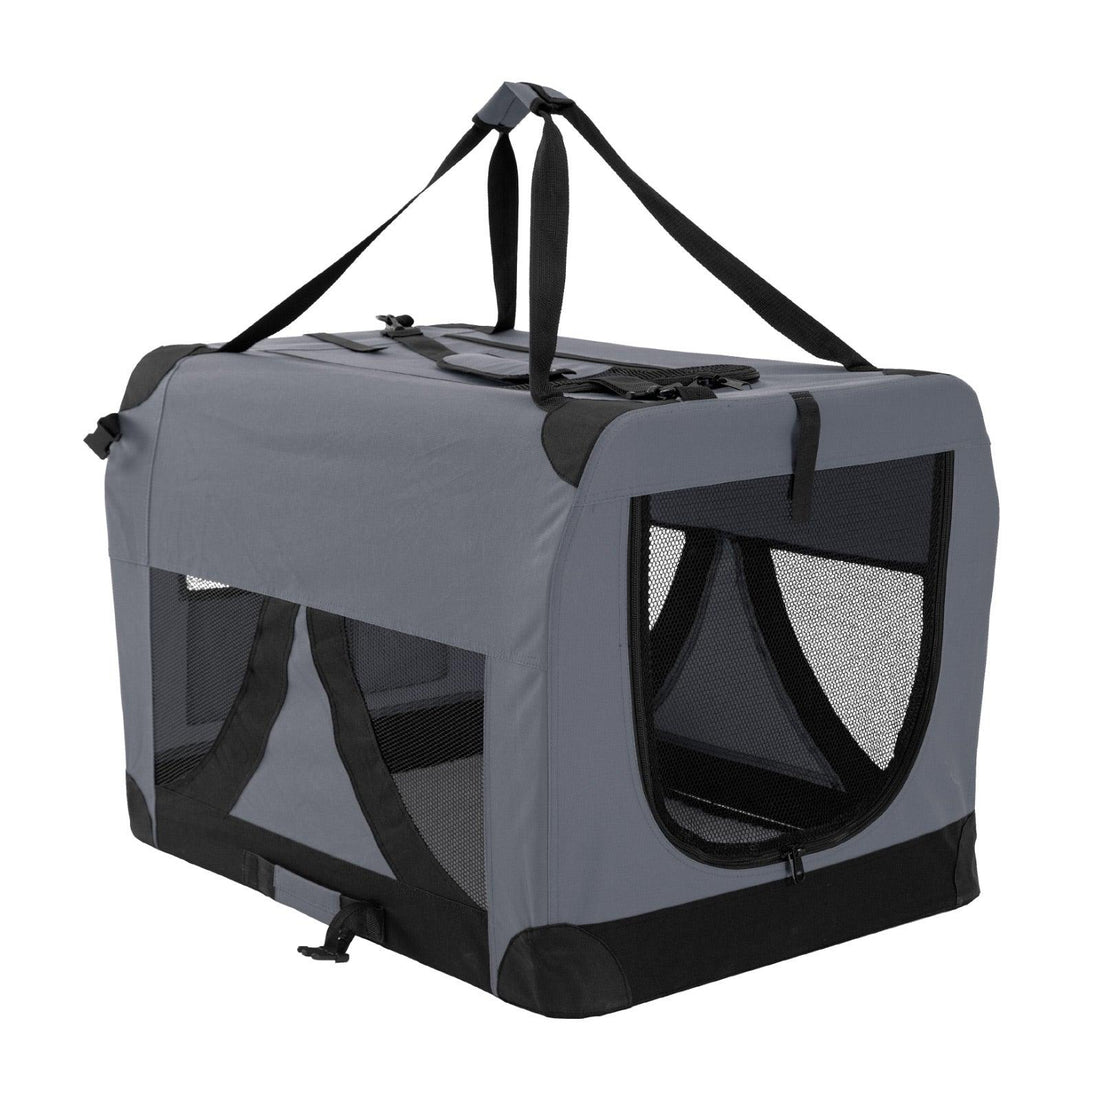 Portable Soft Dog Cage Crate Carrier - GREY - Pets Gear